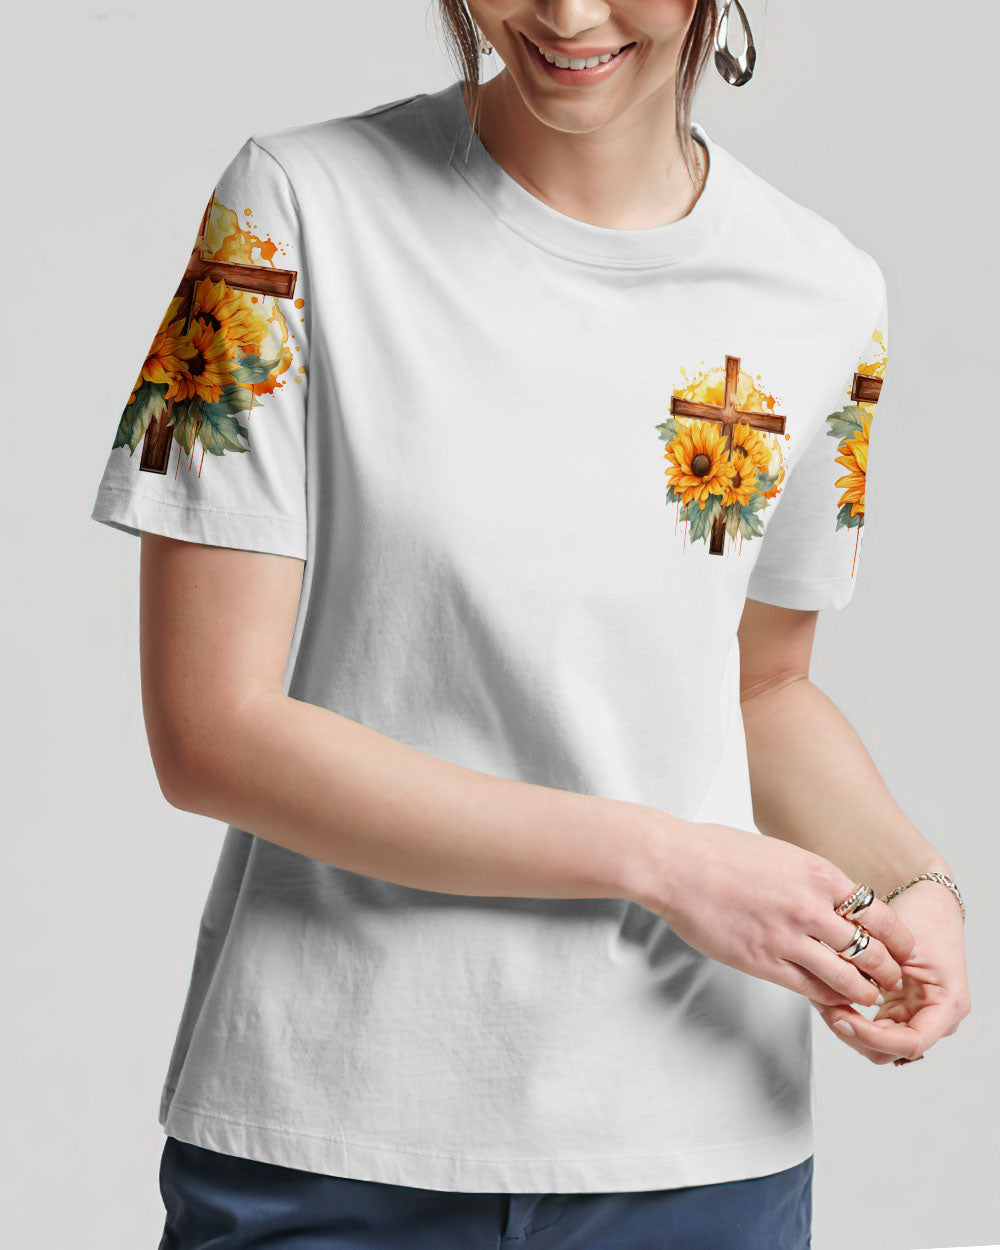 category_short sleeves